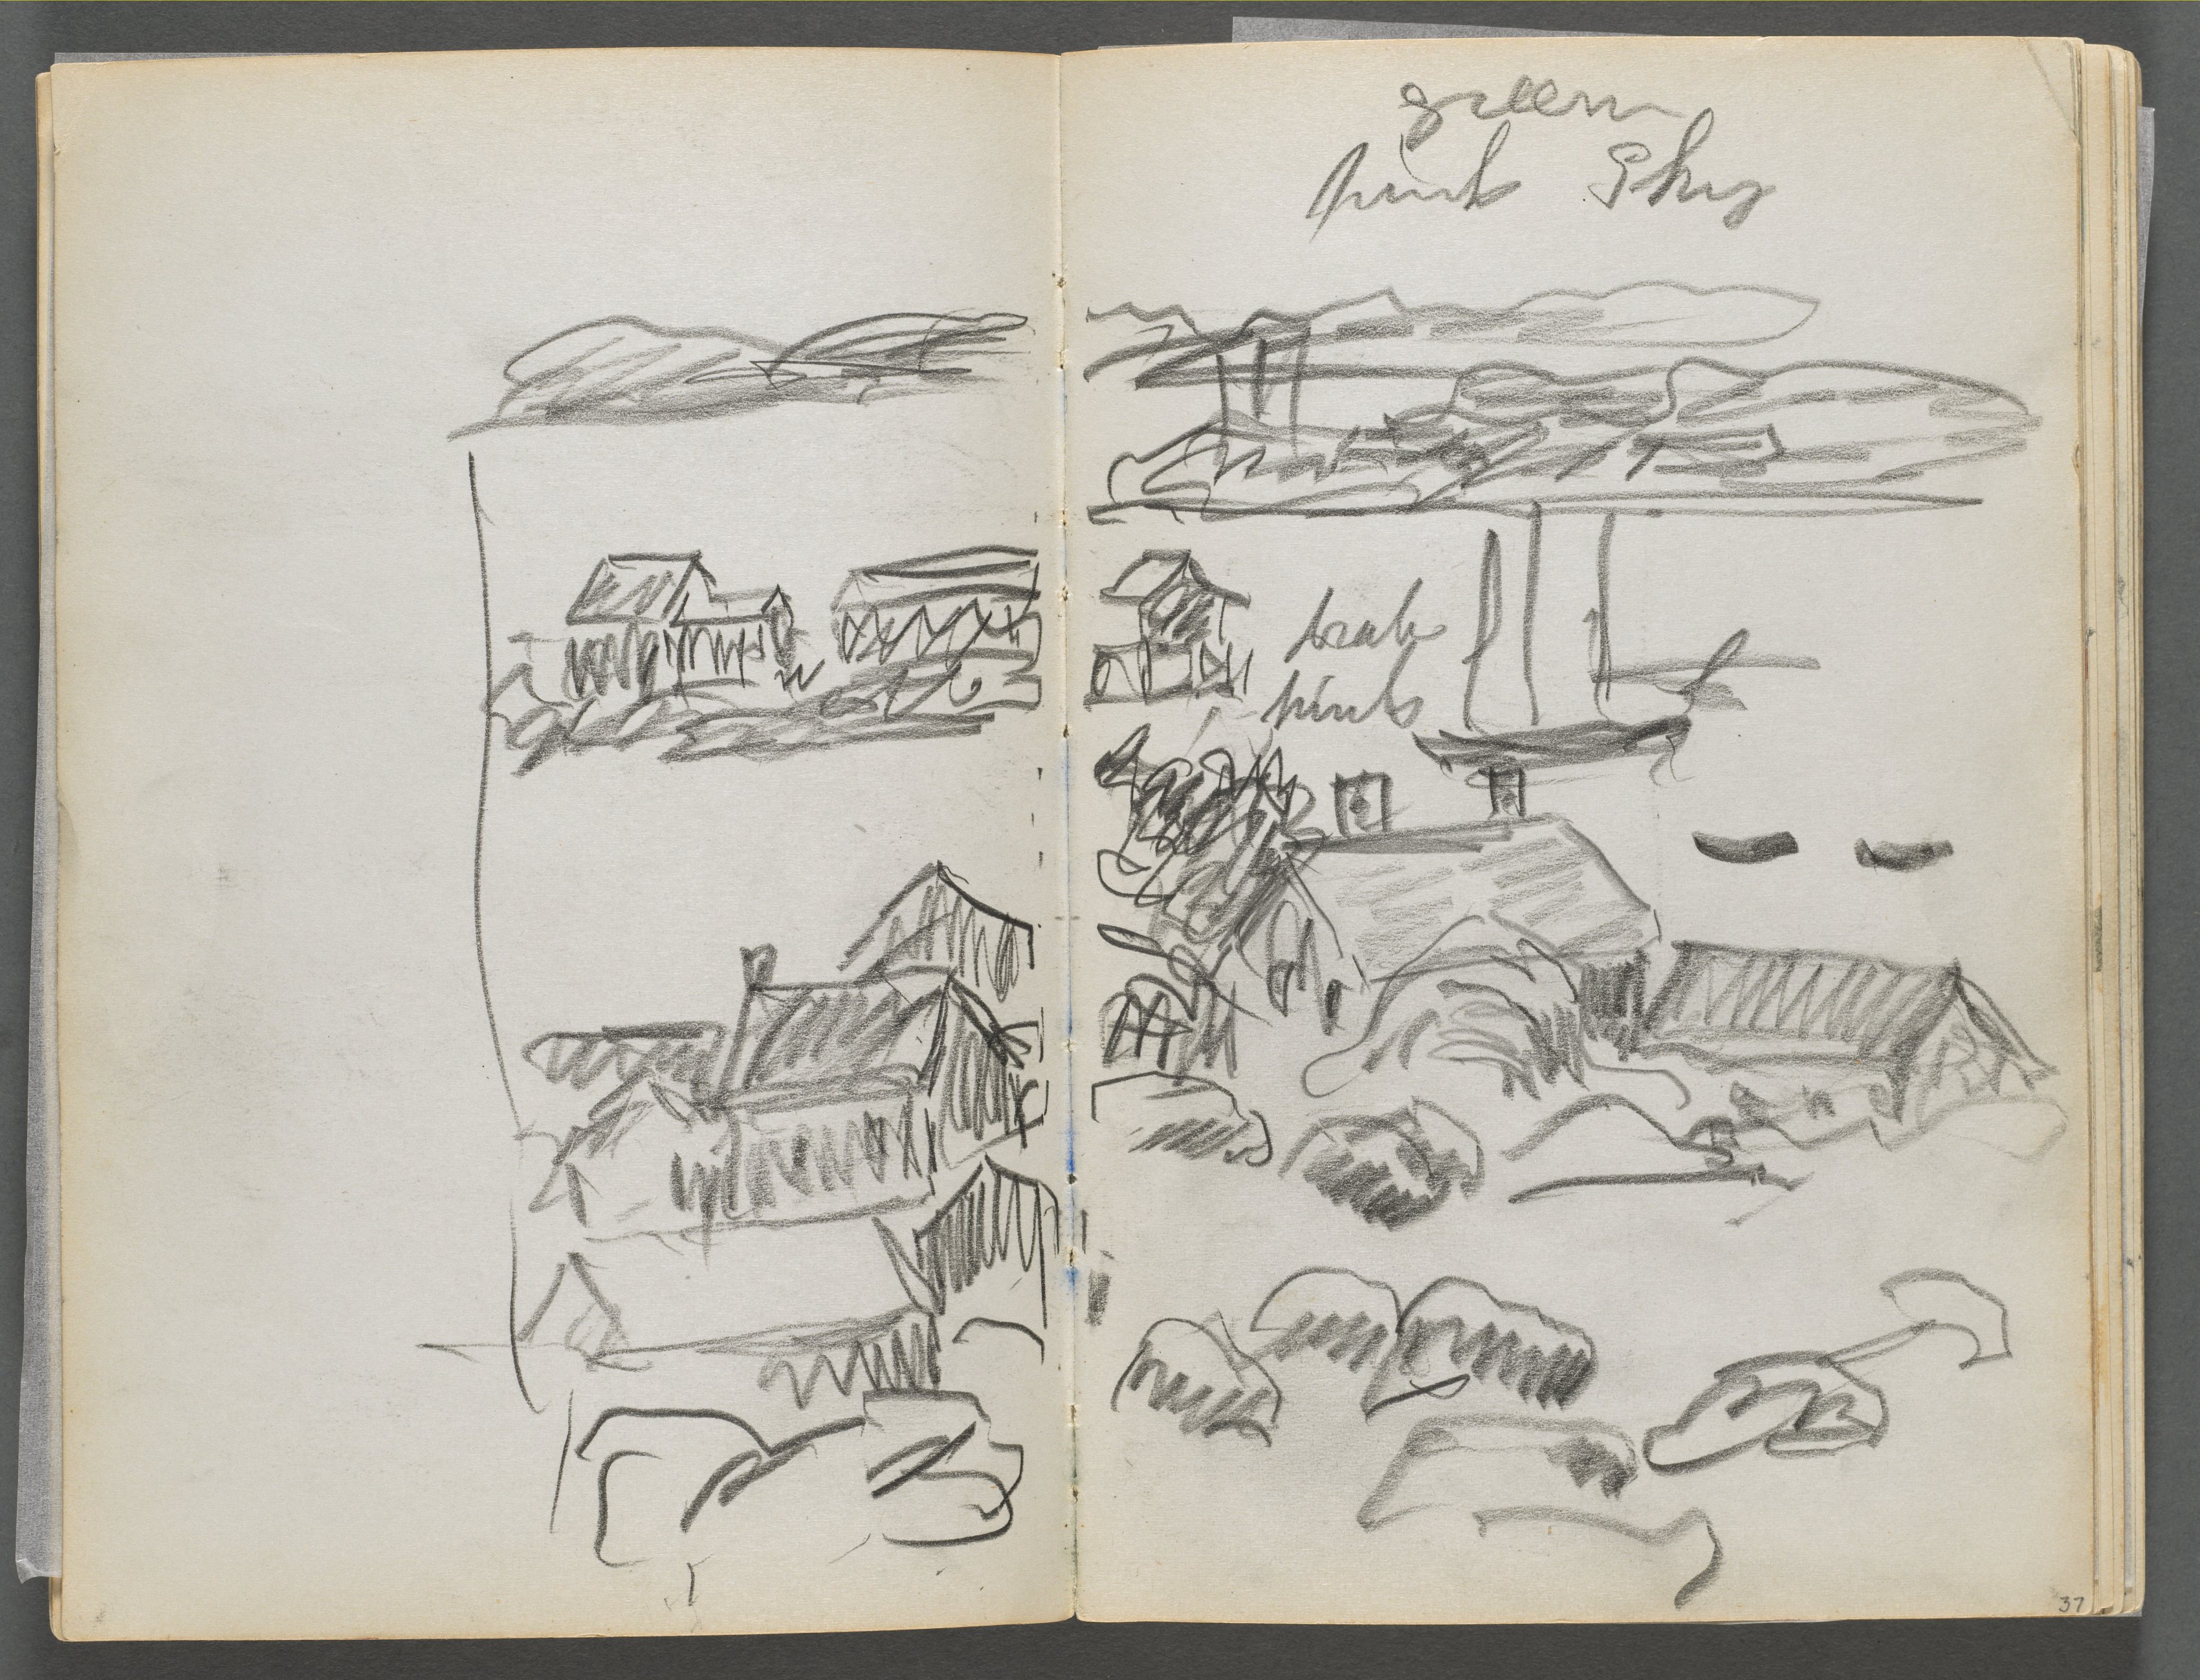 Sketchbook, The Dells, N° 127, page 036 & 37: View of a Cove from above